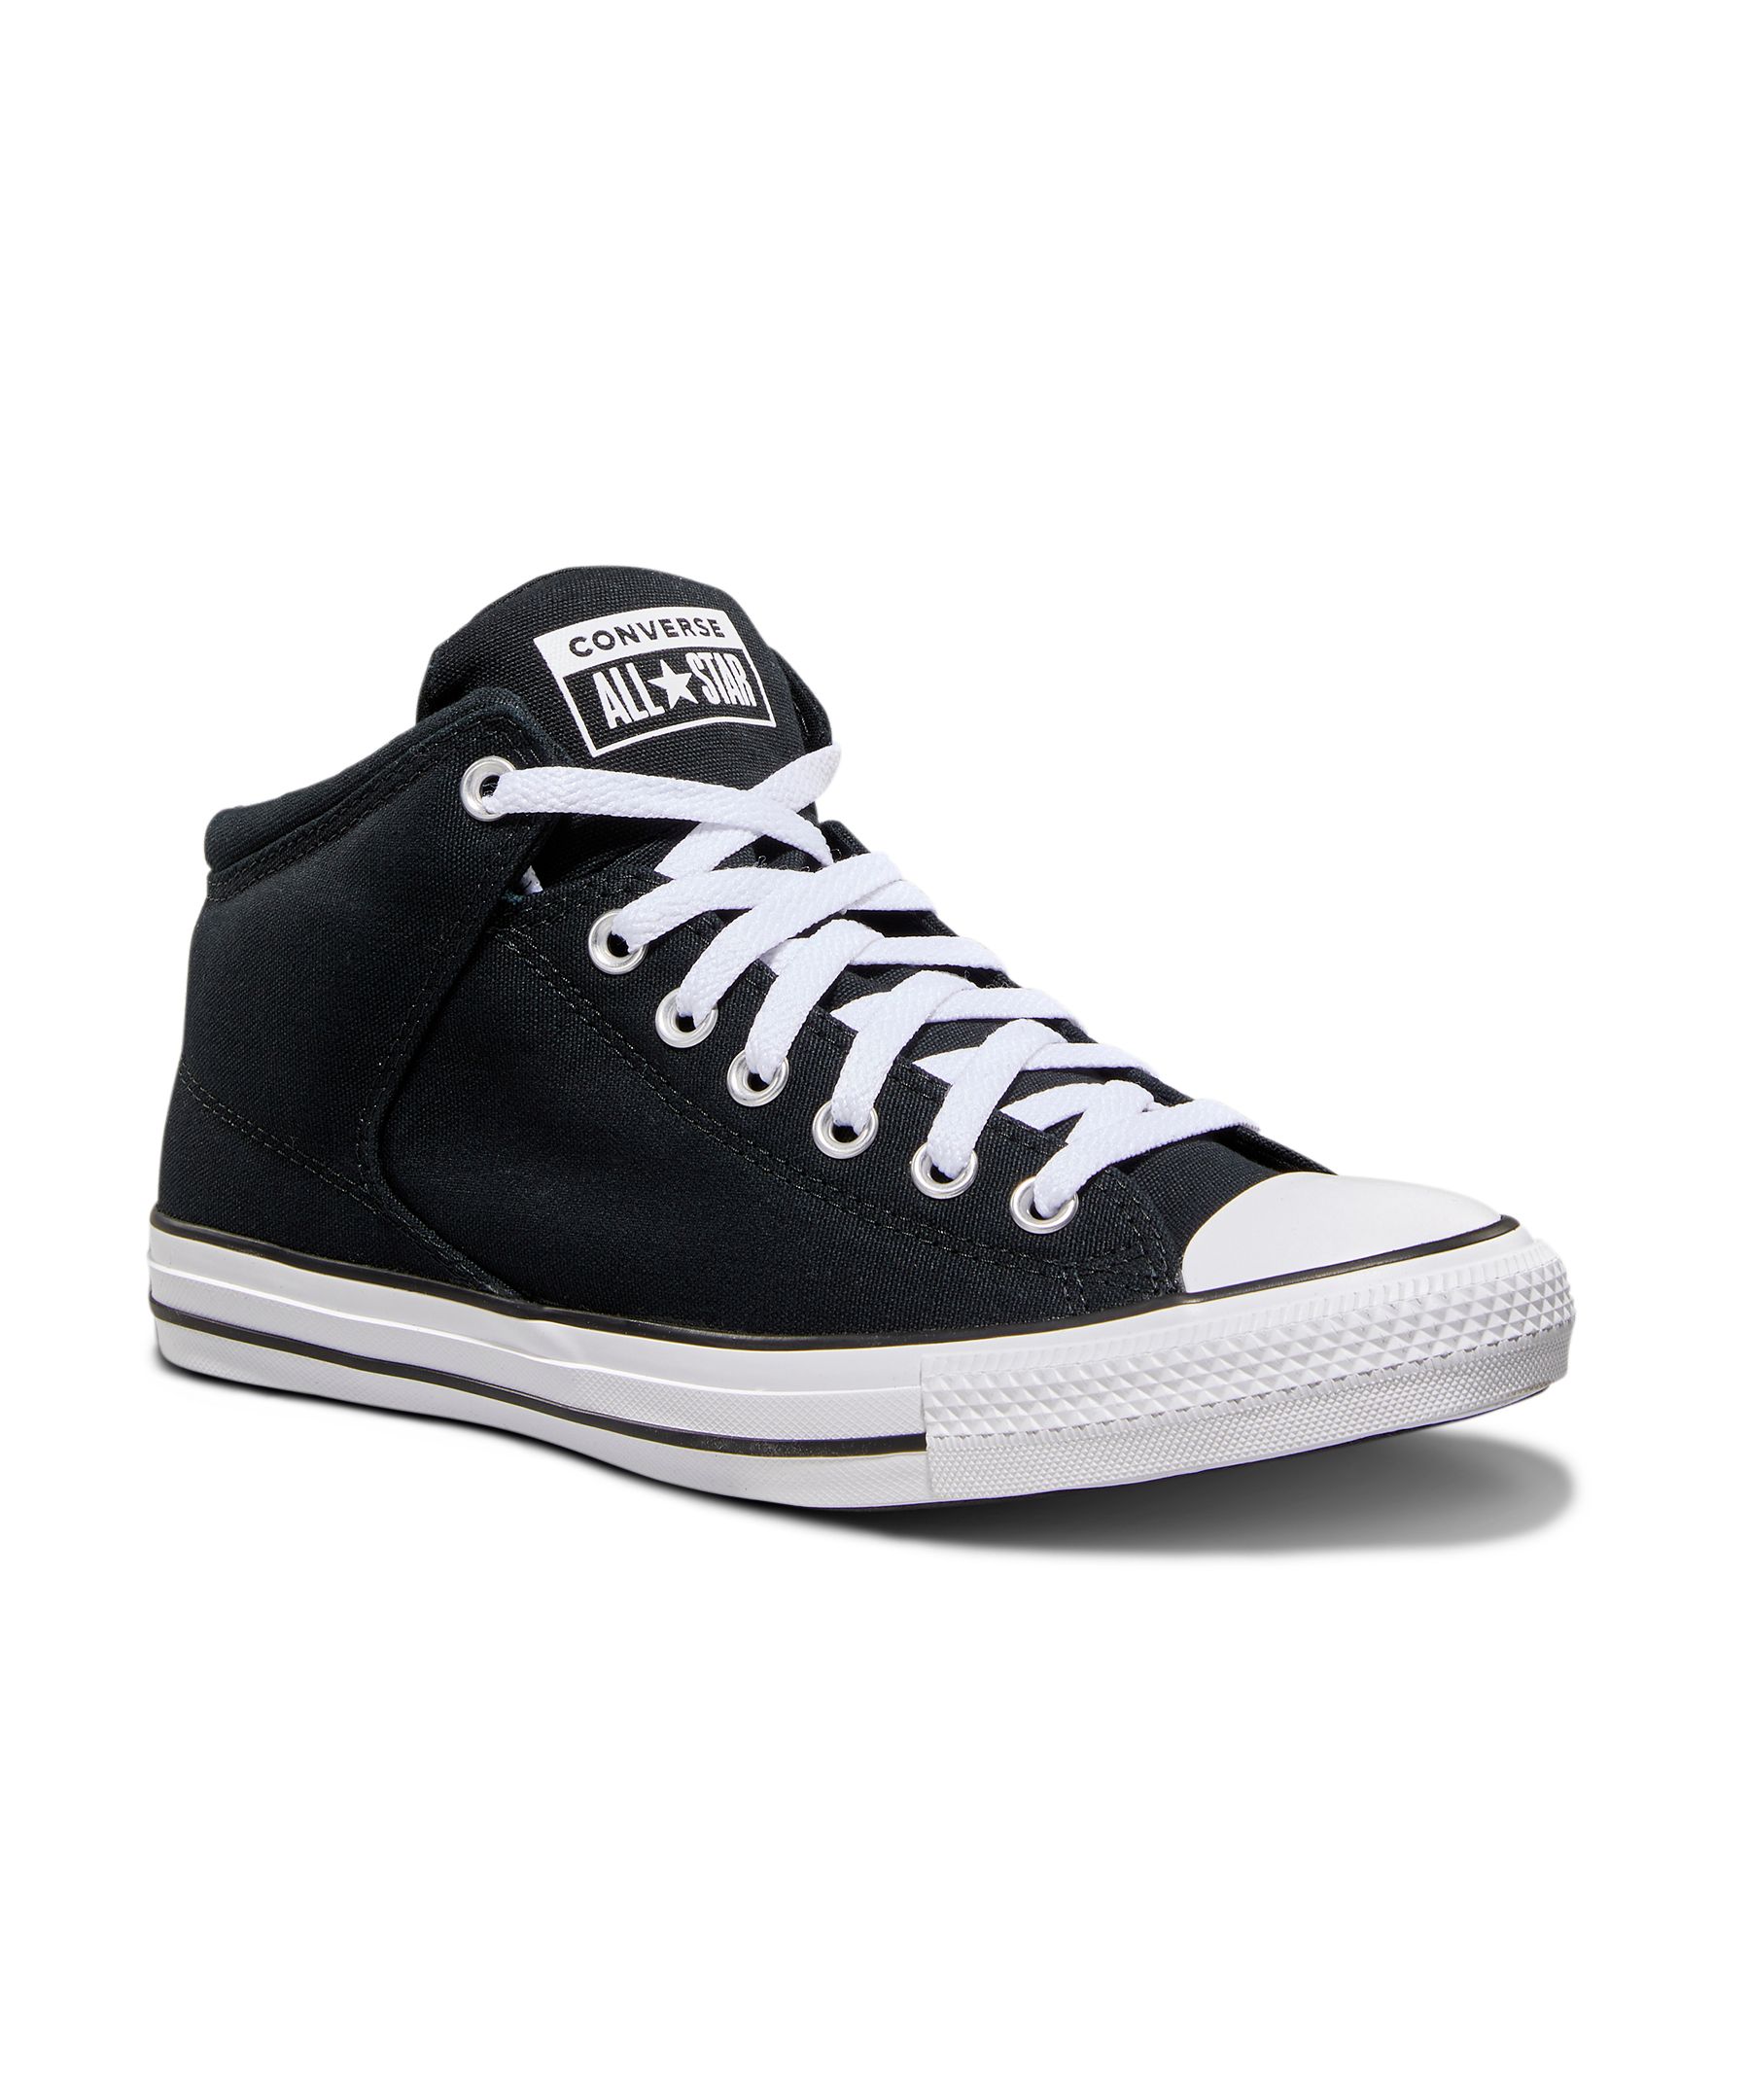 Chaussures Converse, pour hommes, All Star High Street